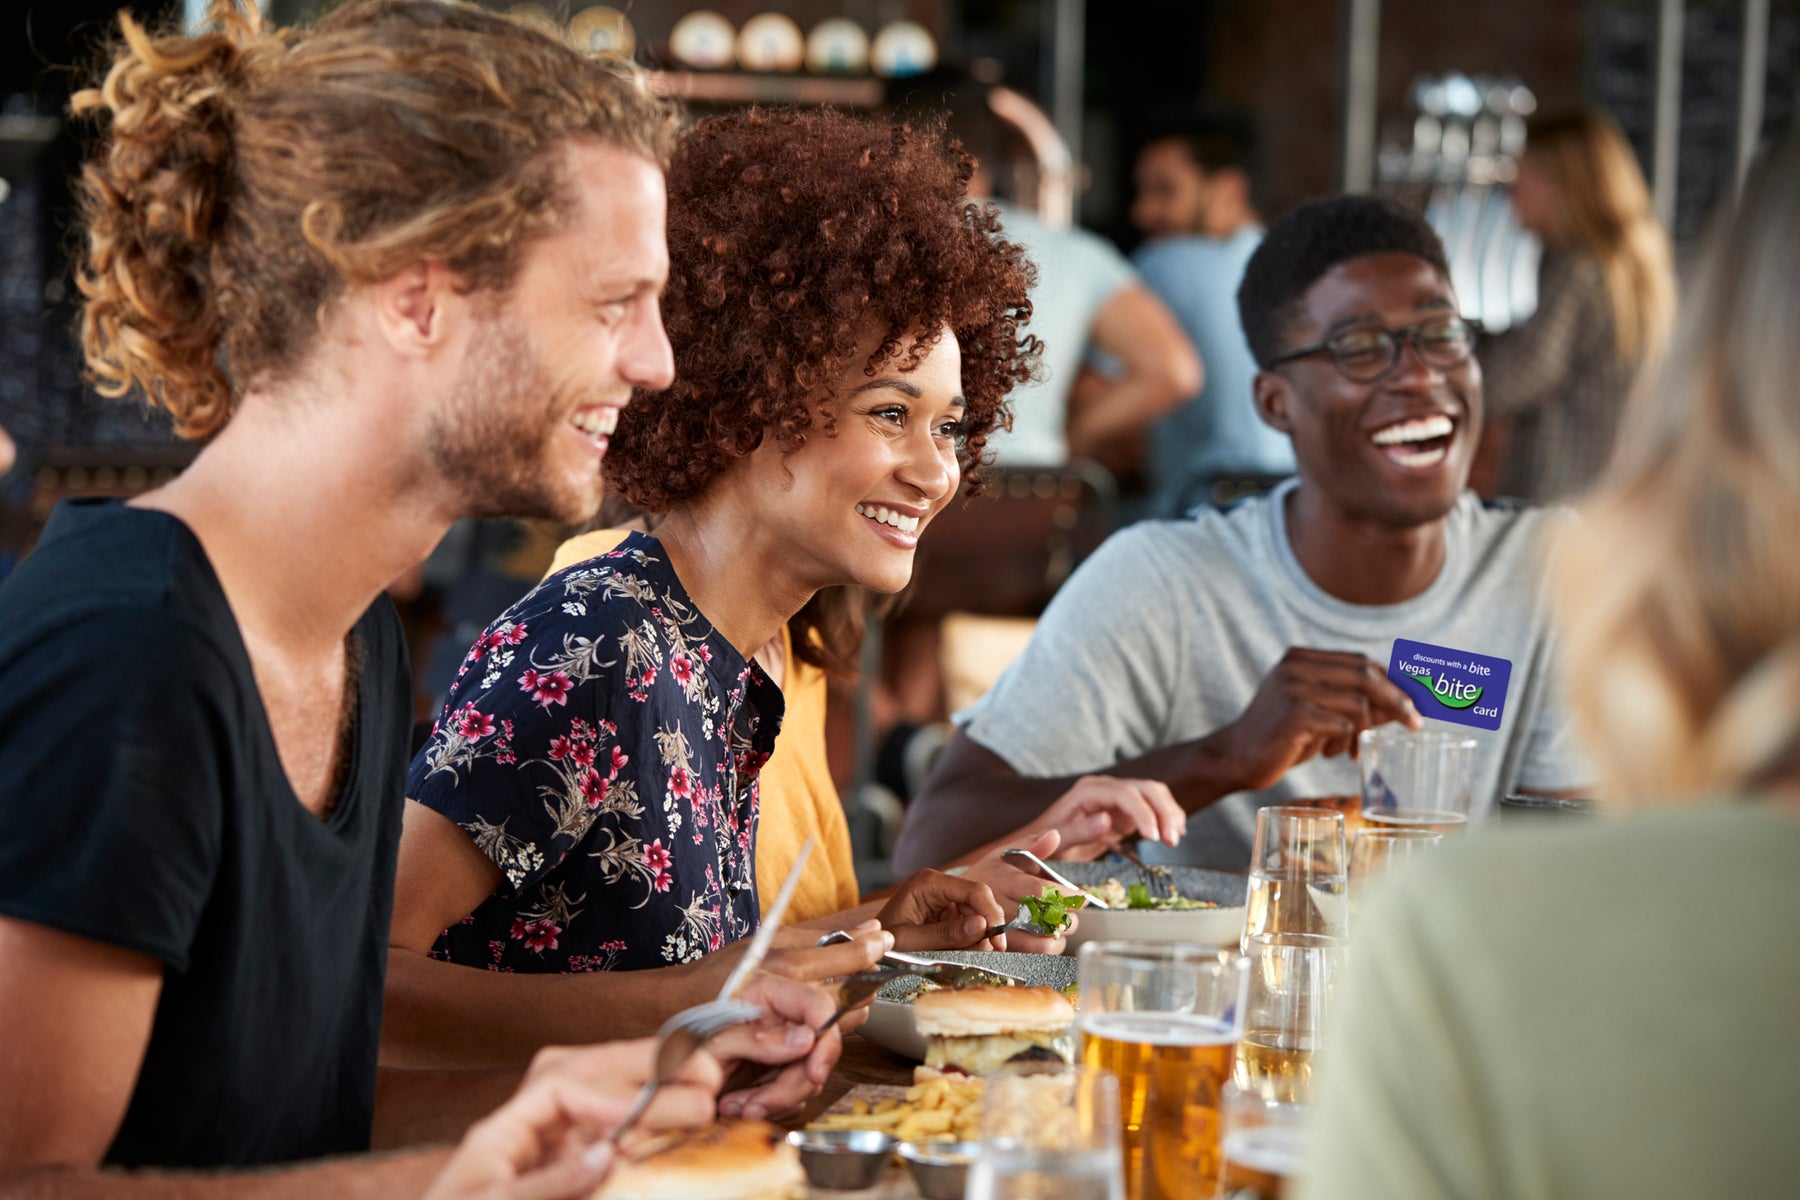 group of people enjoying dining out and using card for discounts